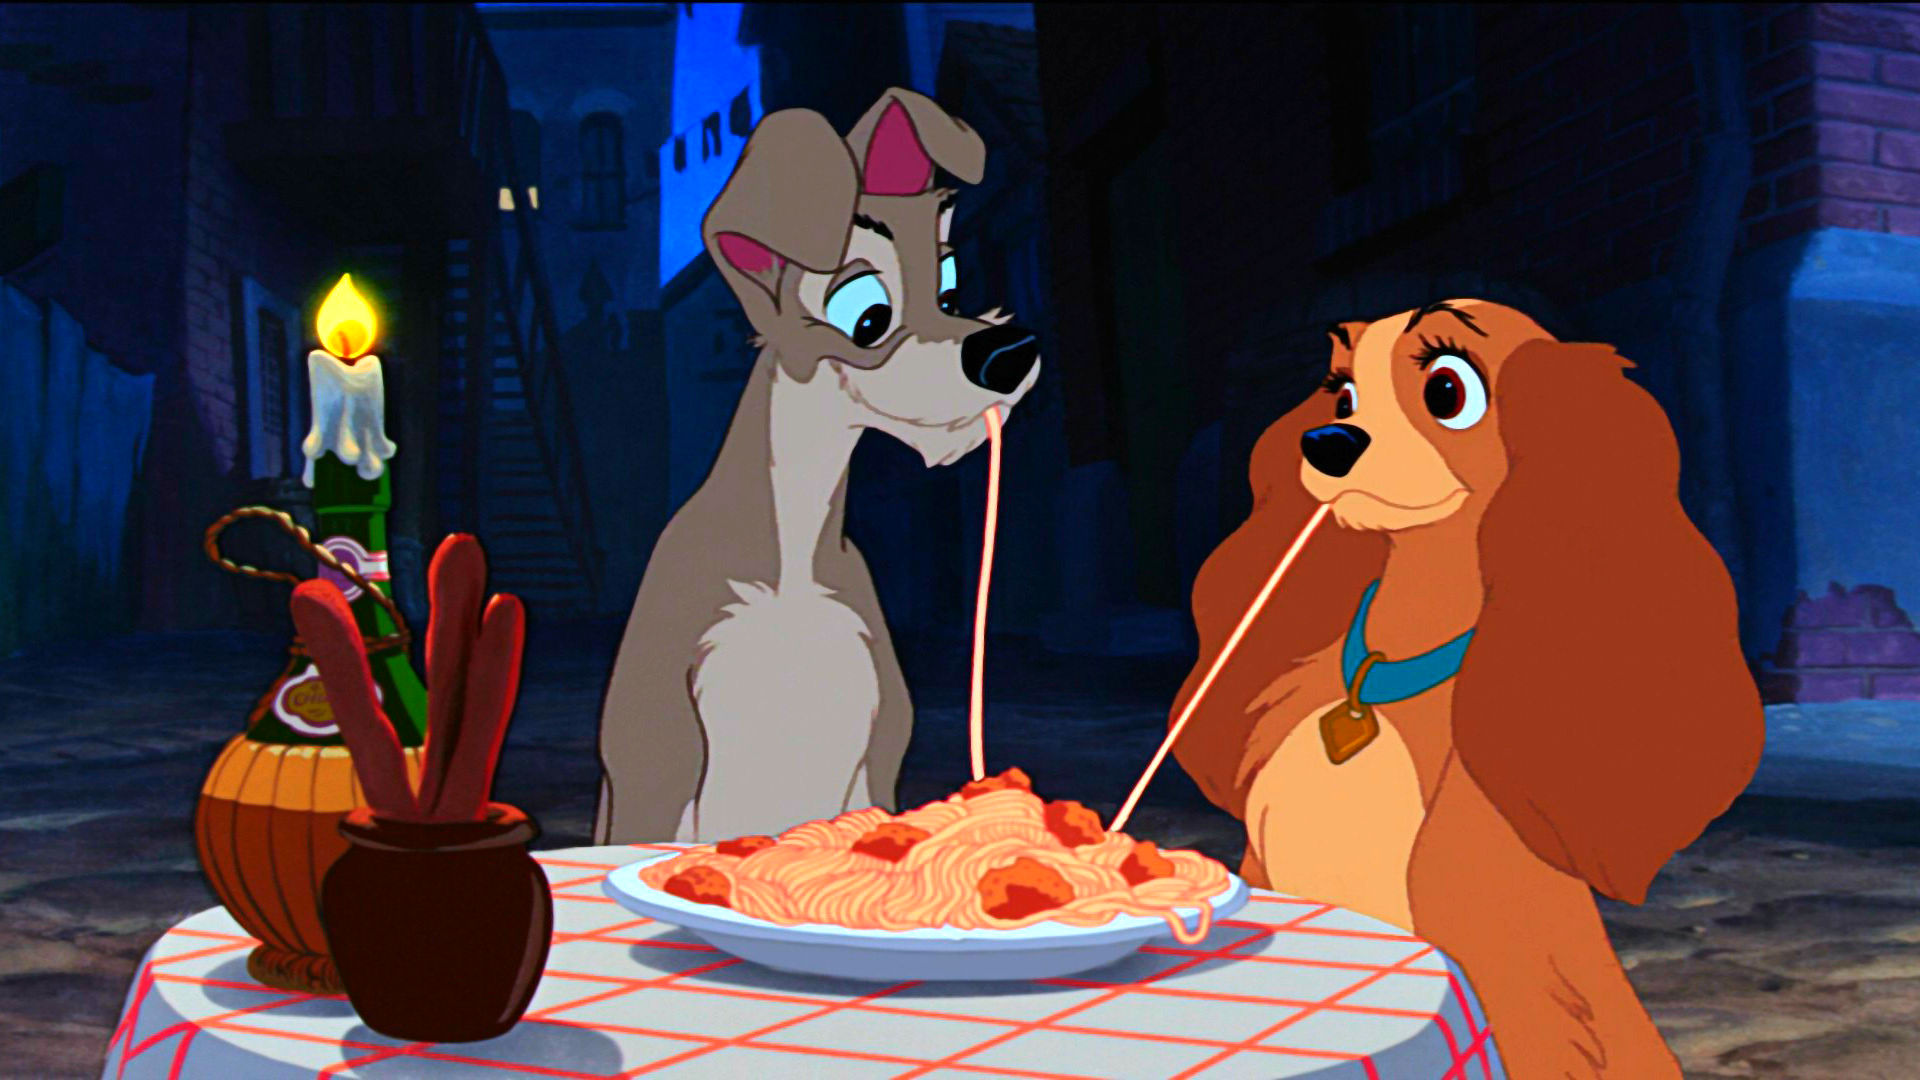 Live-Action ‘Lady and the Tramp’ Coming to Disney’s Streaming Service in 2019